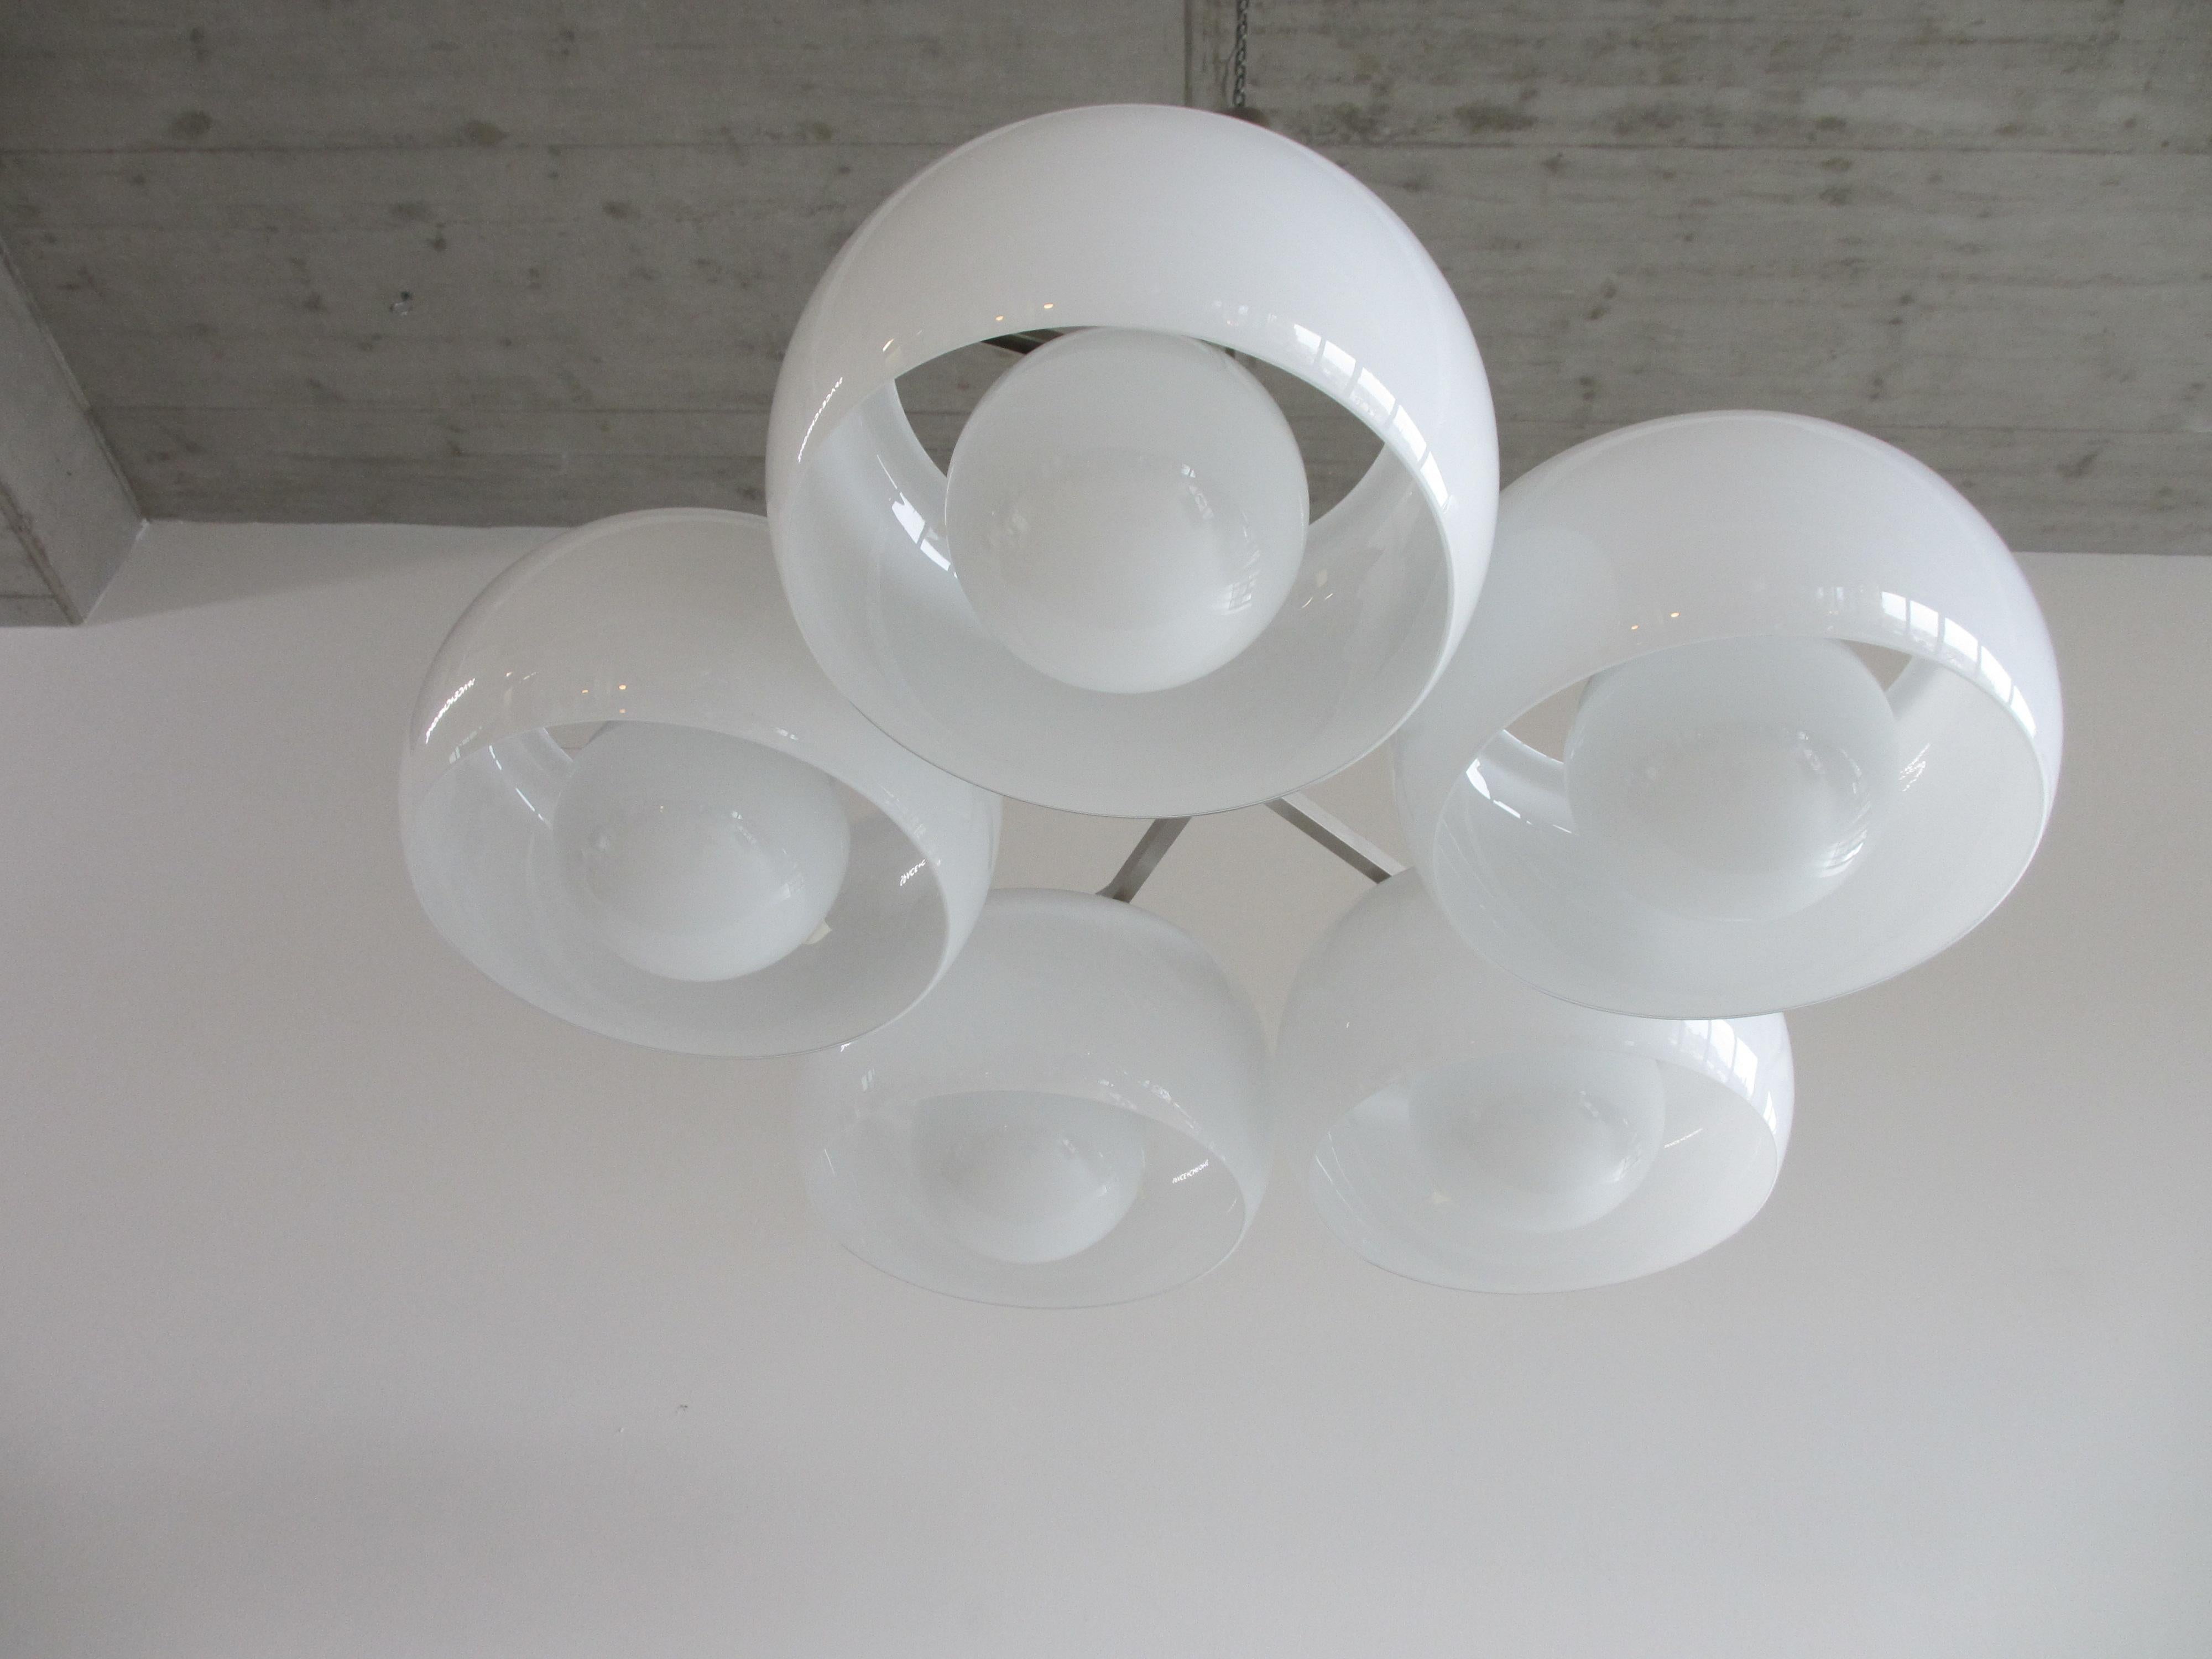 Mid-Century Modern Large Ceiling Lamp PENTACLINIO, designed by Vico MAGISTRETTI for Artemide, 1961